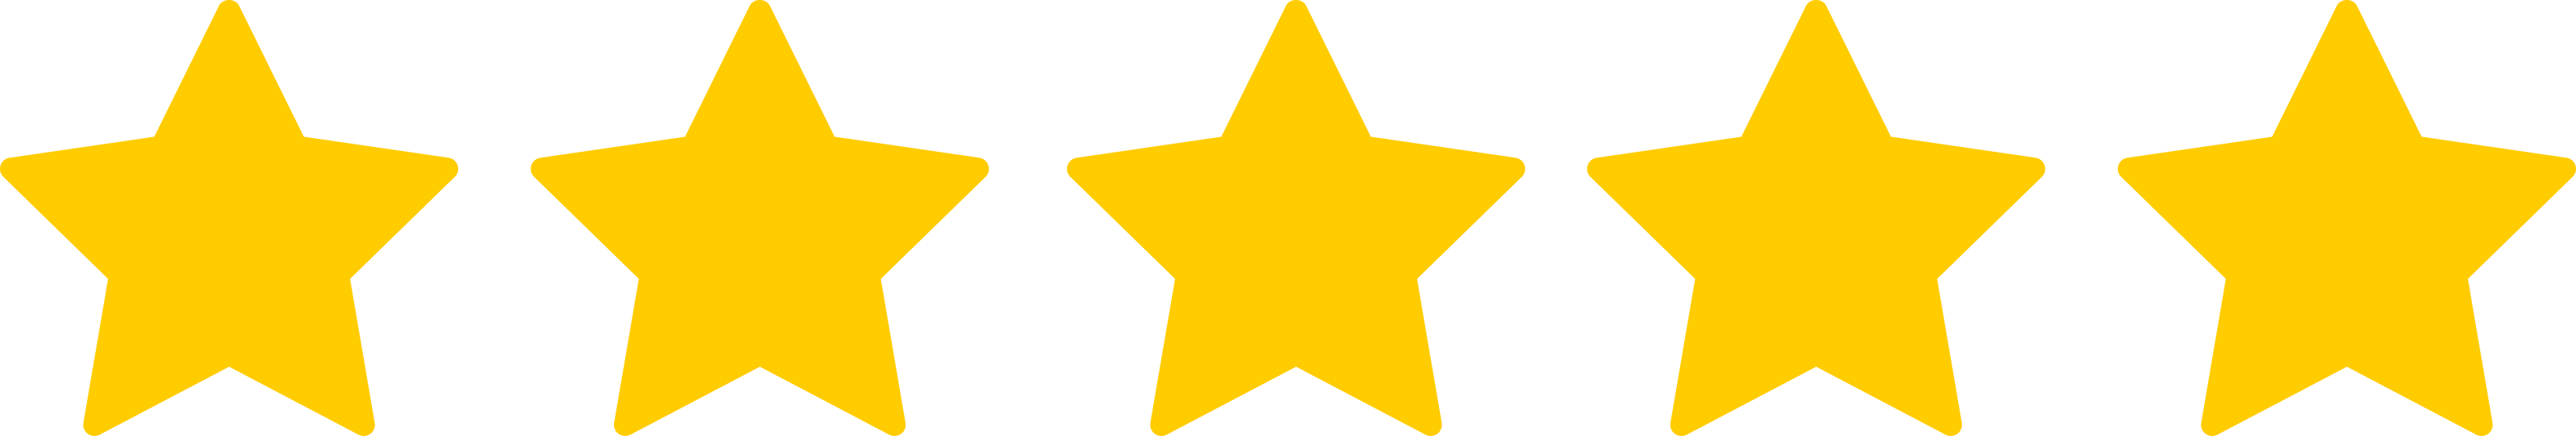 Five yellow stars in a horizontal row on a black background, symbolizing a quality level in water damage restoration.